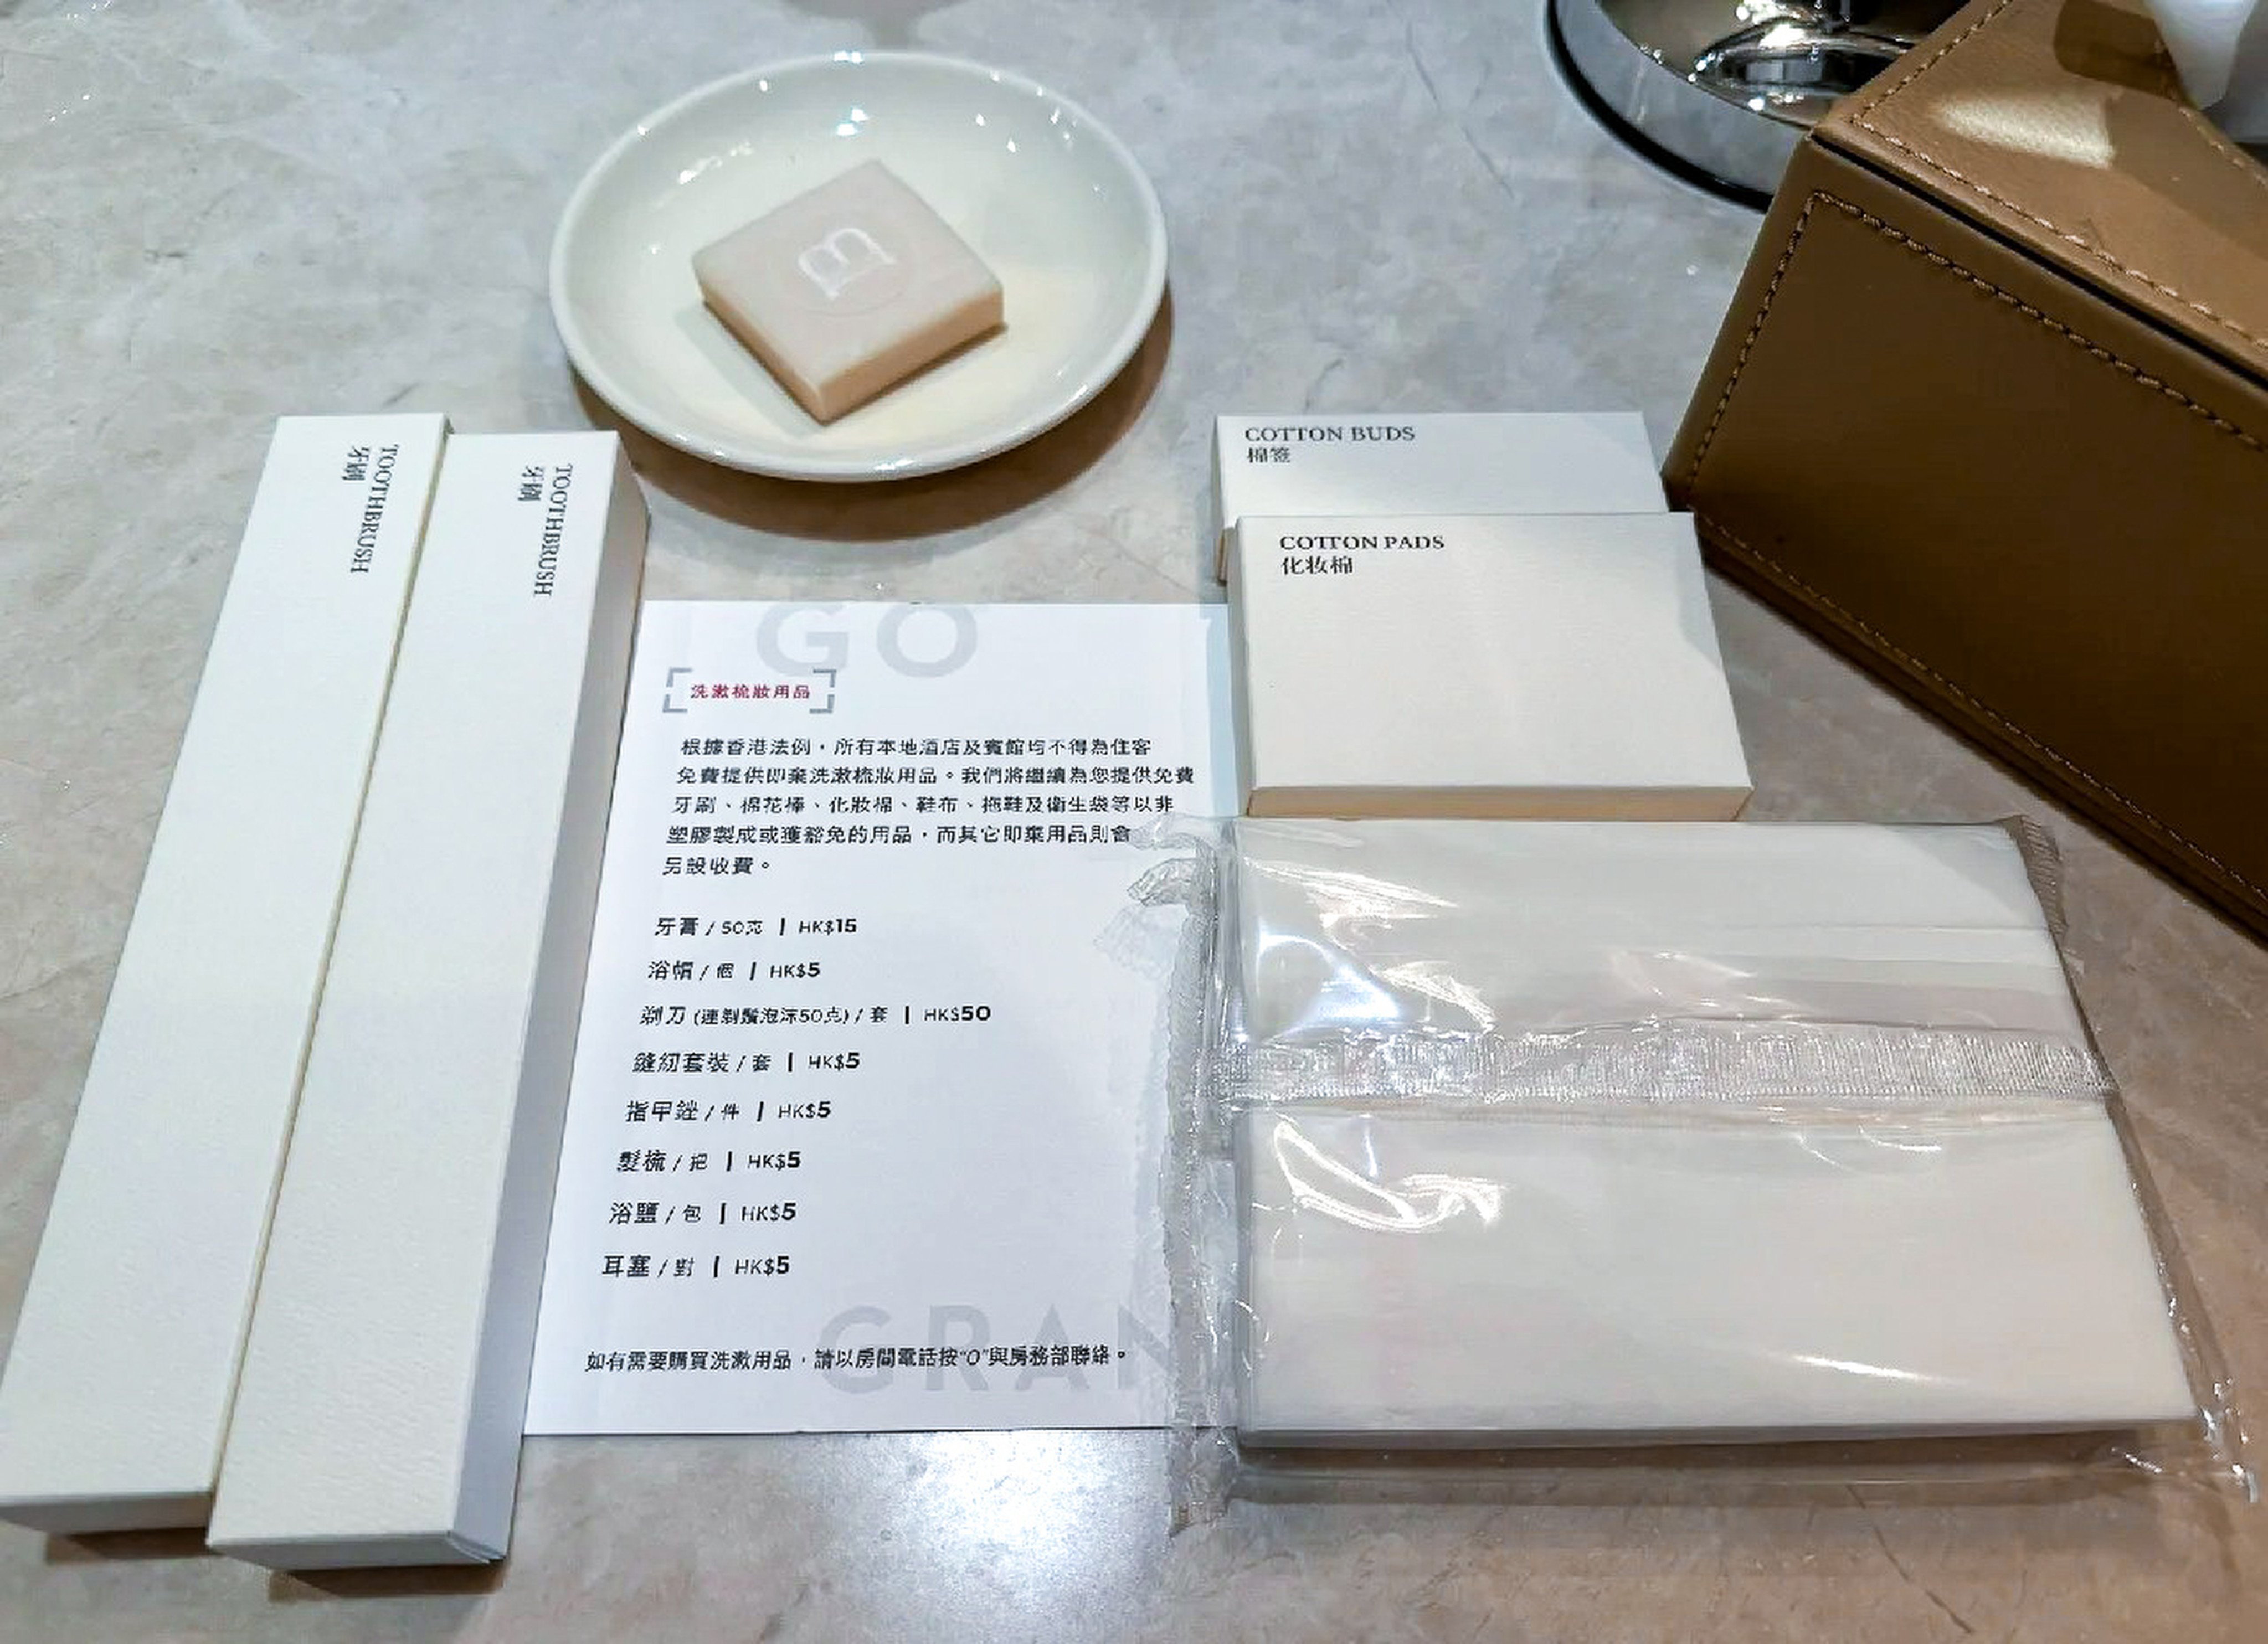 A selection of hotel toiletries packed in environmentally friendly packaging at the Grand Hyatt in Wan Chai. Photo: Xiaohongshu